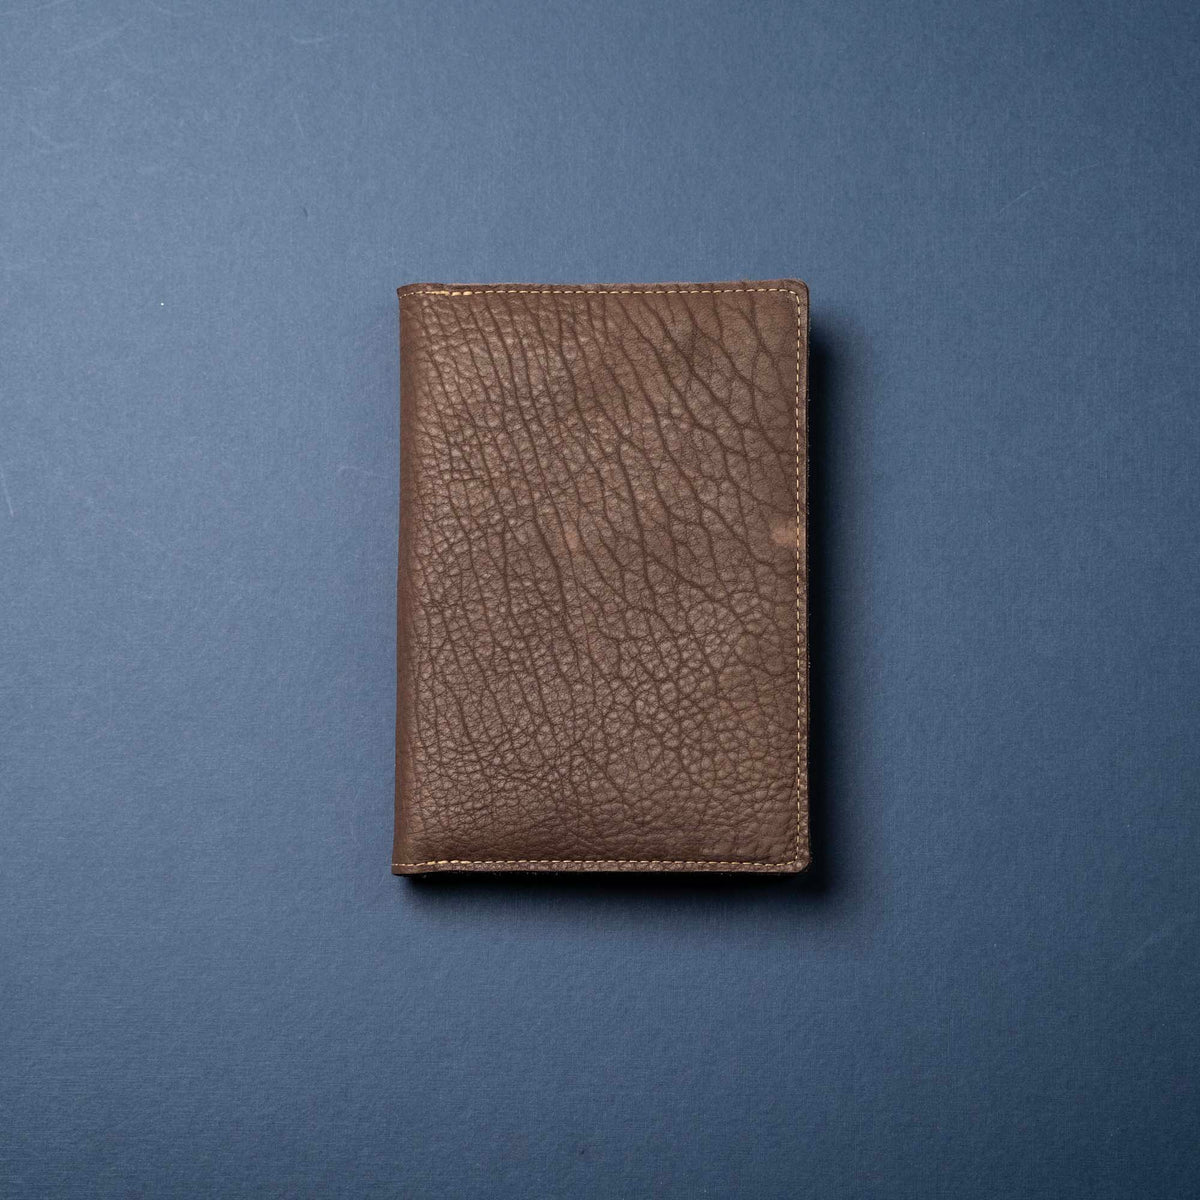 Dark Bison Leather - A5 Leather Journal - High Character (One-Of-A-Kind) Notebooks - 192 pages 8.75” x 6.25”